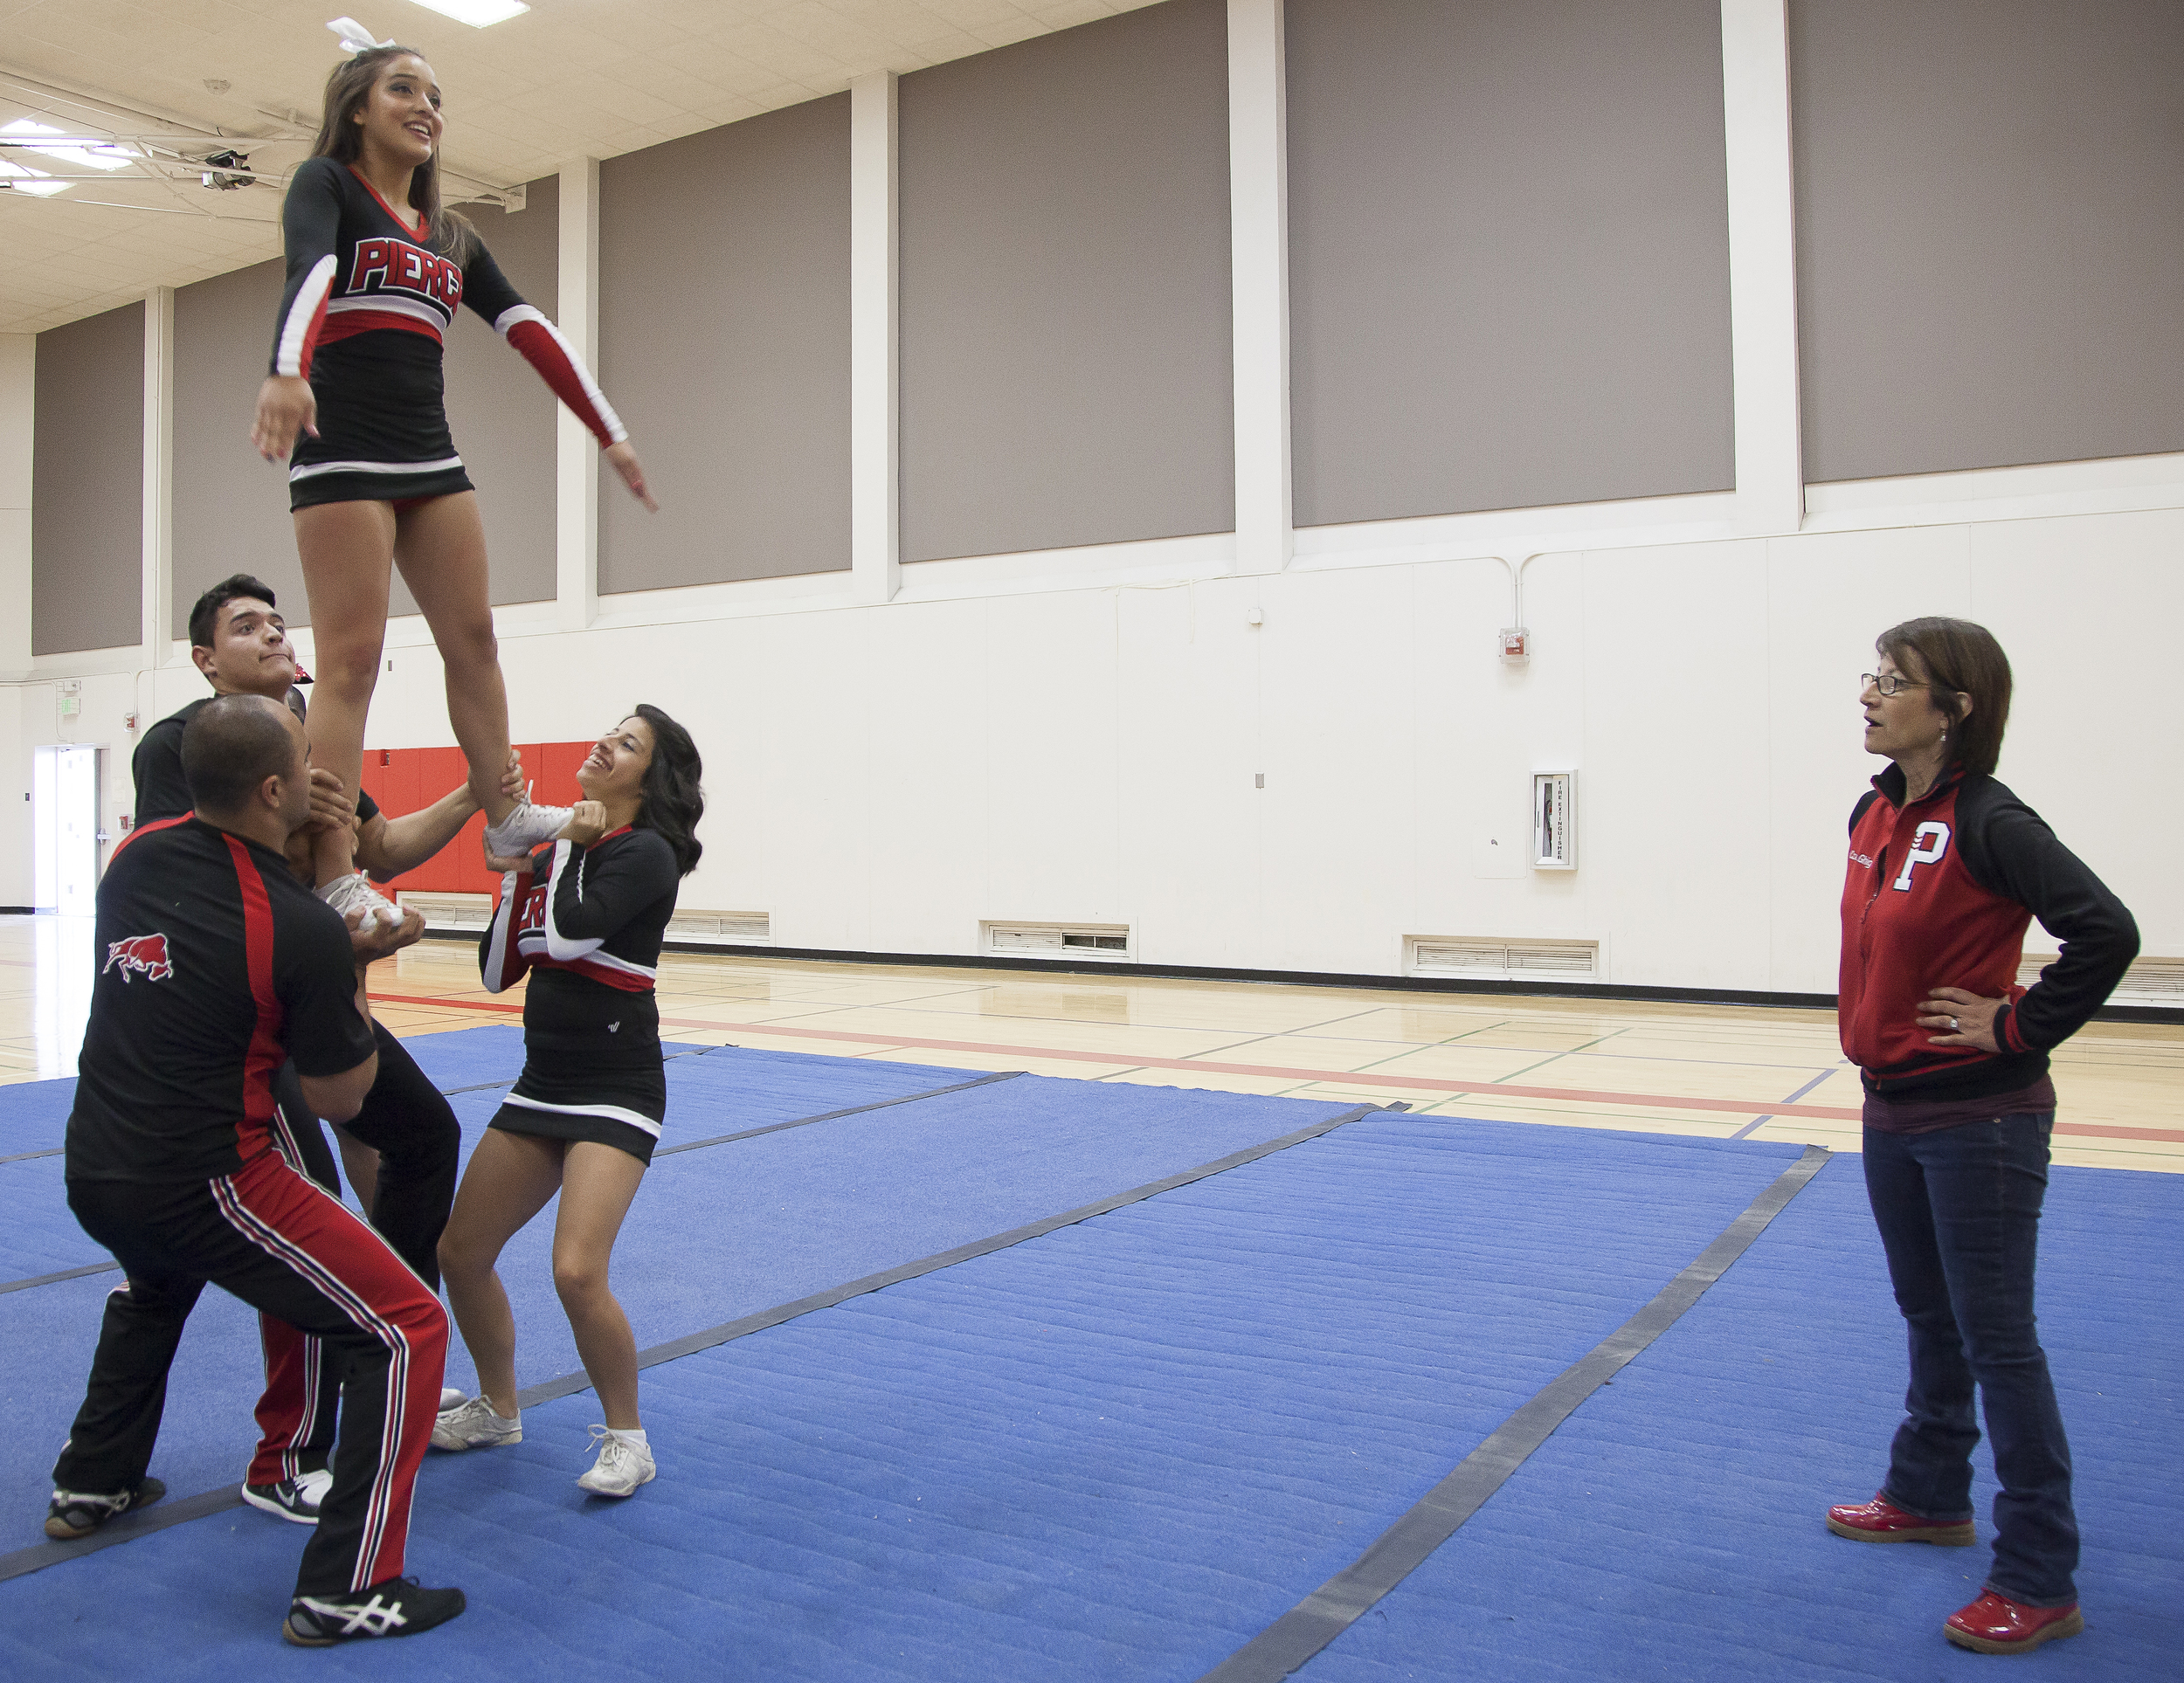  Coach Jenny Ghiglia watches&nbsp;as members of the Pierce Cheer Competition team perform a maneuver called a "full up" during a practice session in the North Gym on Sunday March 1, 2015. Woodland Hills, Calif.  Read the full story&nbsp; here  